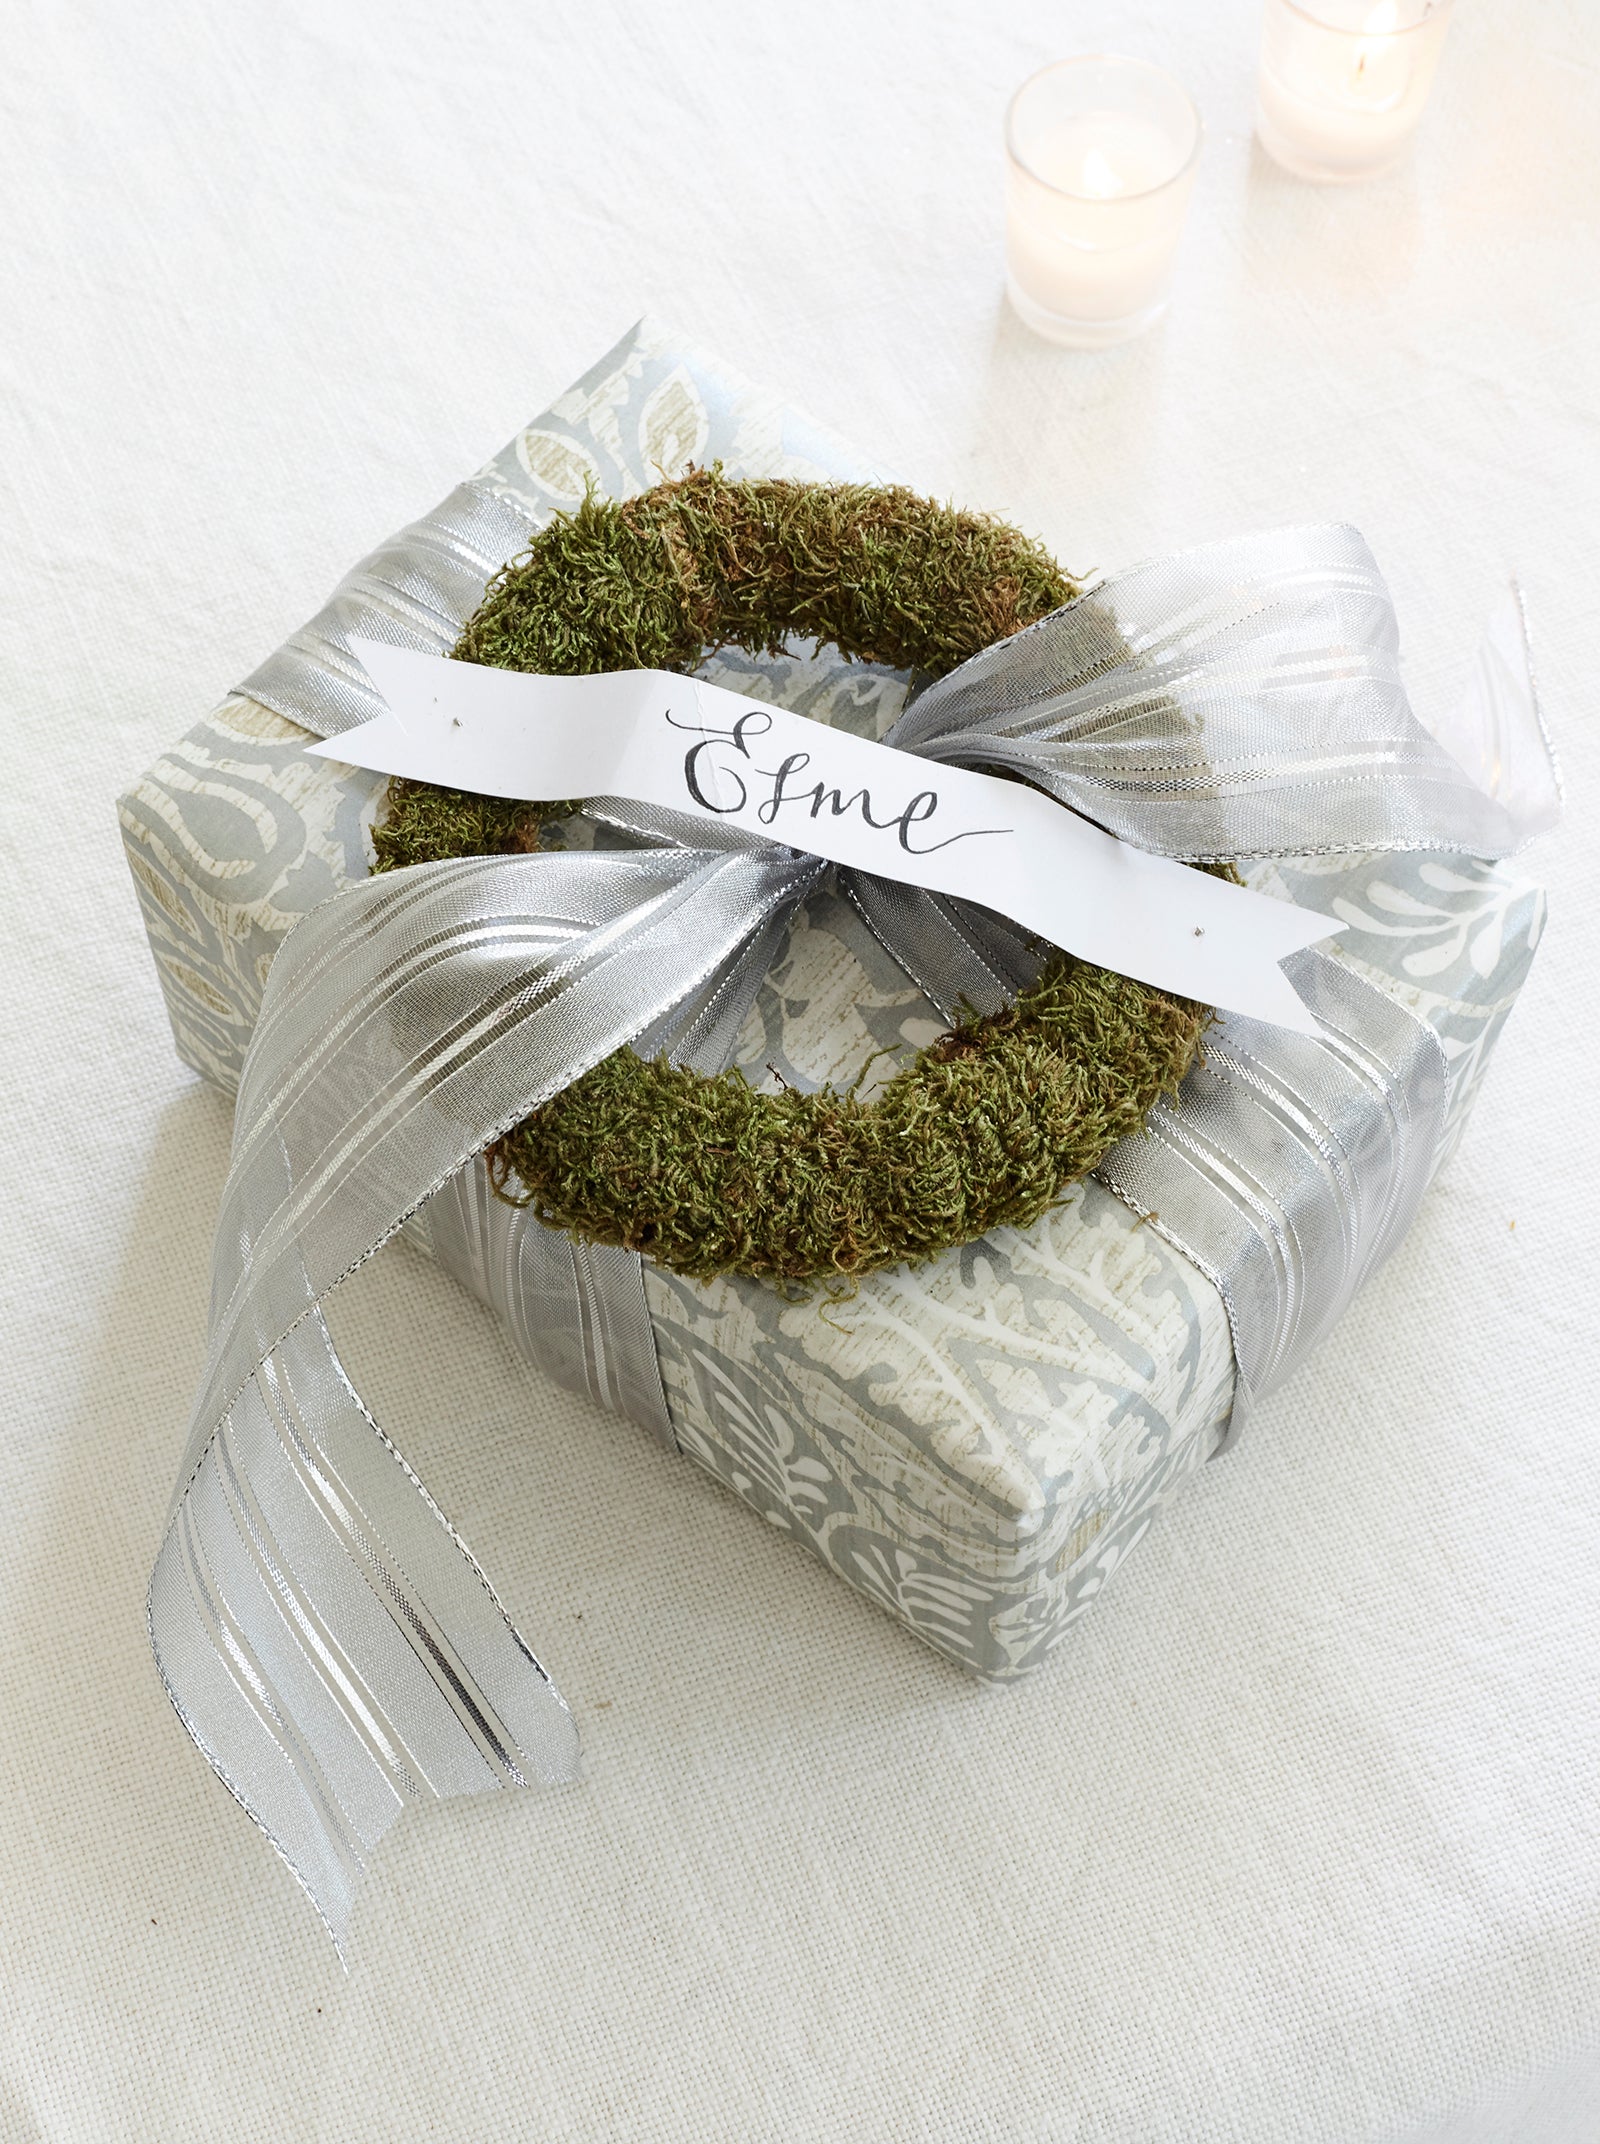 Christmas present wrapped in grey and white paper with silver ribbon, green moss wreath and name tag.